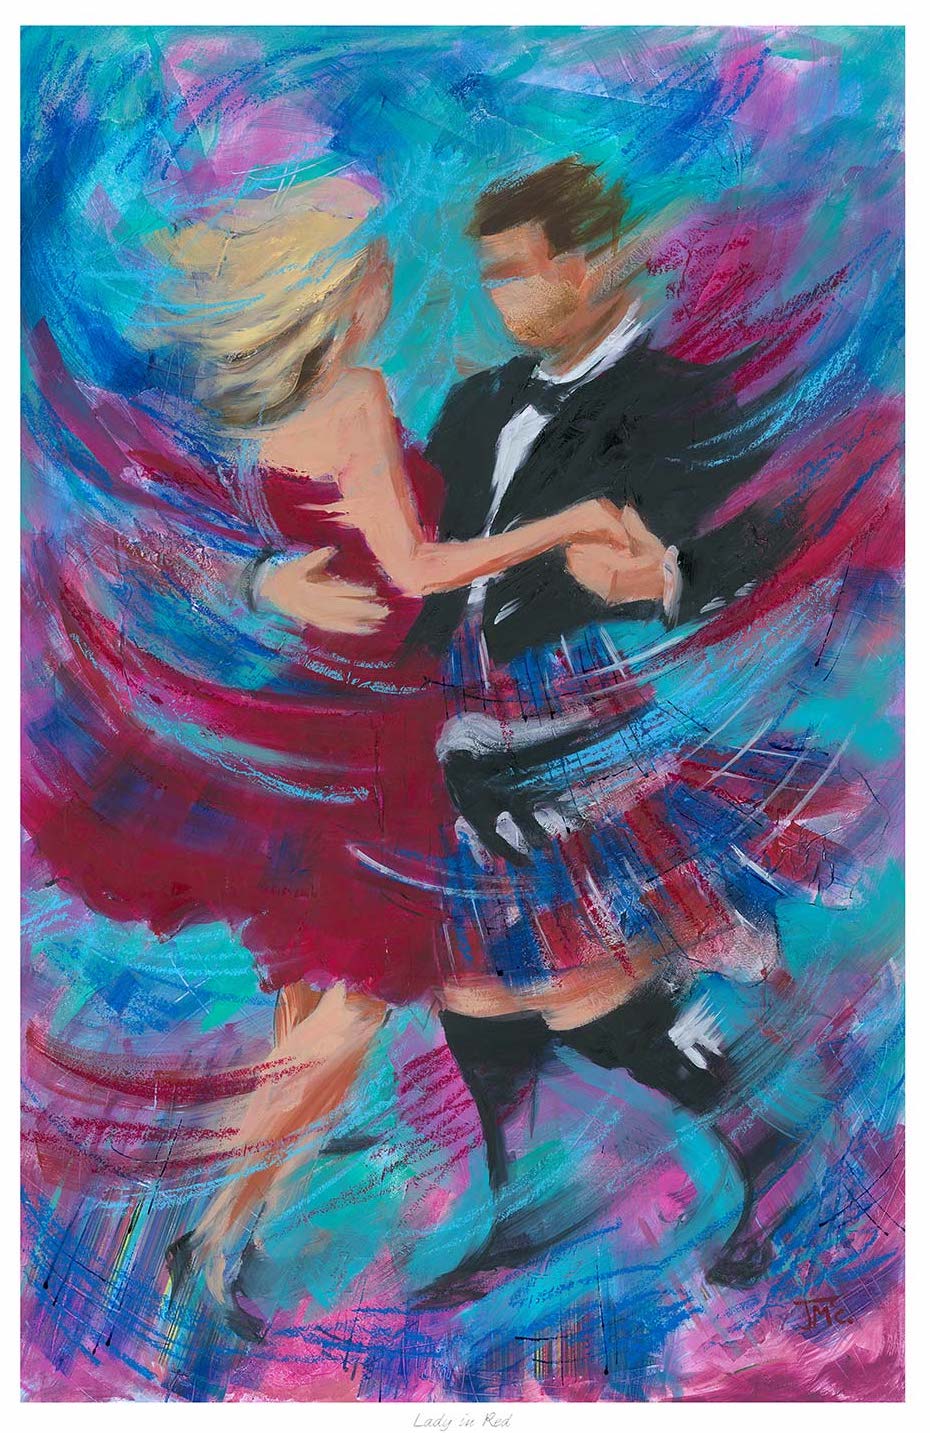 Lady In Red Ceilidh Dancers by Janet McCrorie